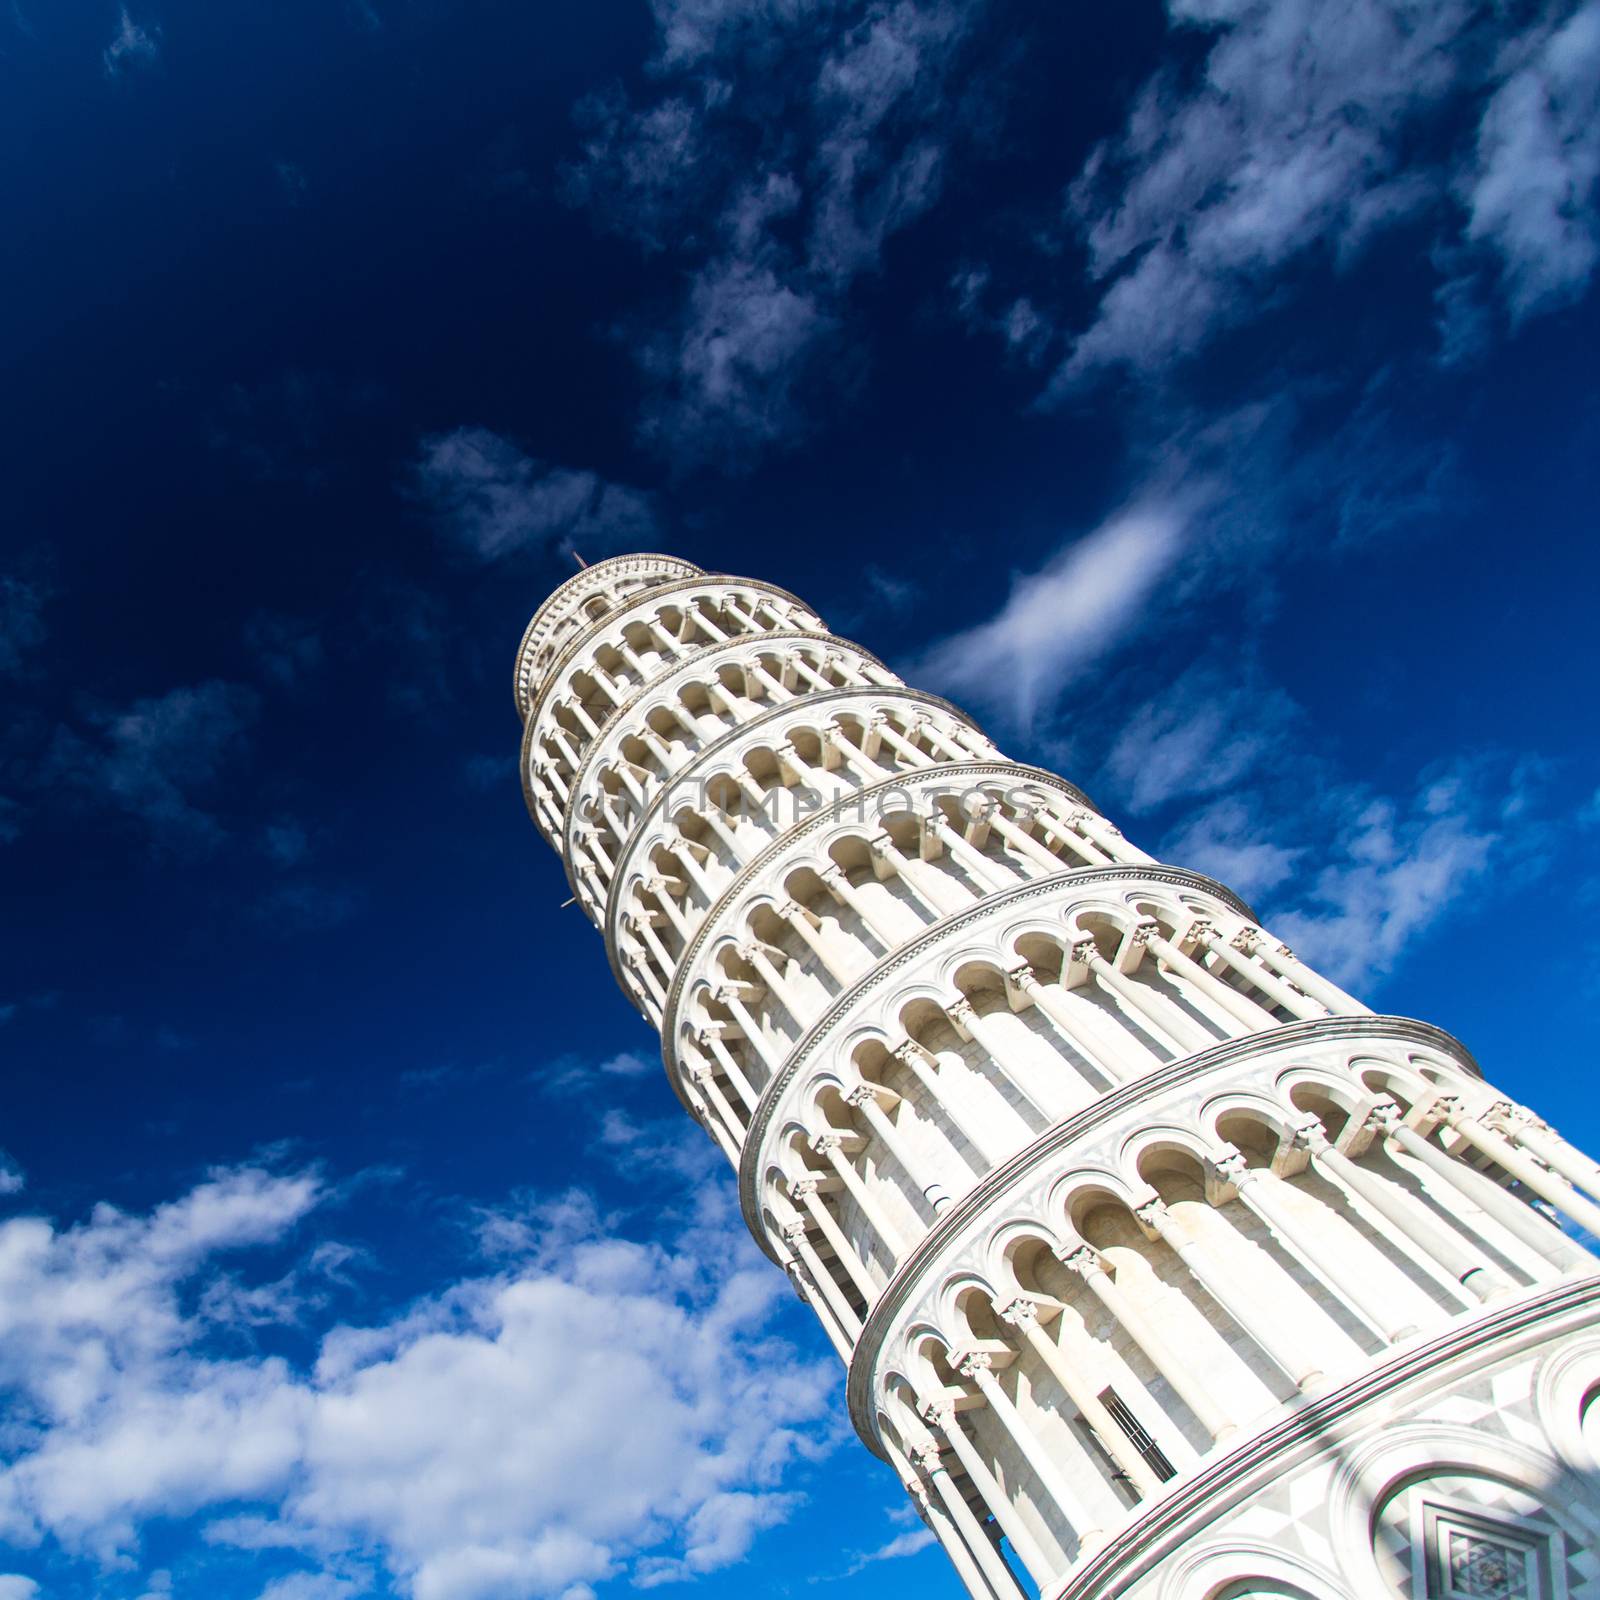 Leaning tower in Pisa, Tuscany, Italy. by kasto